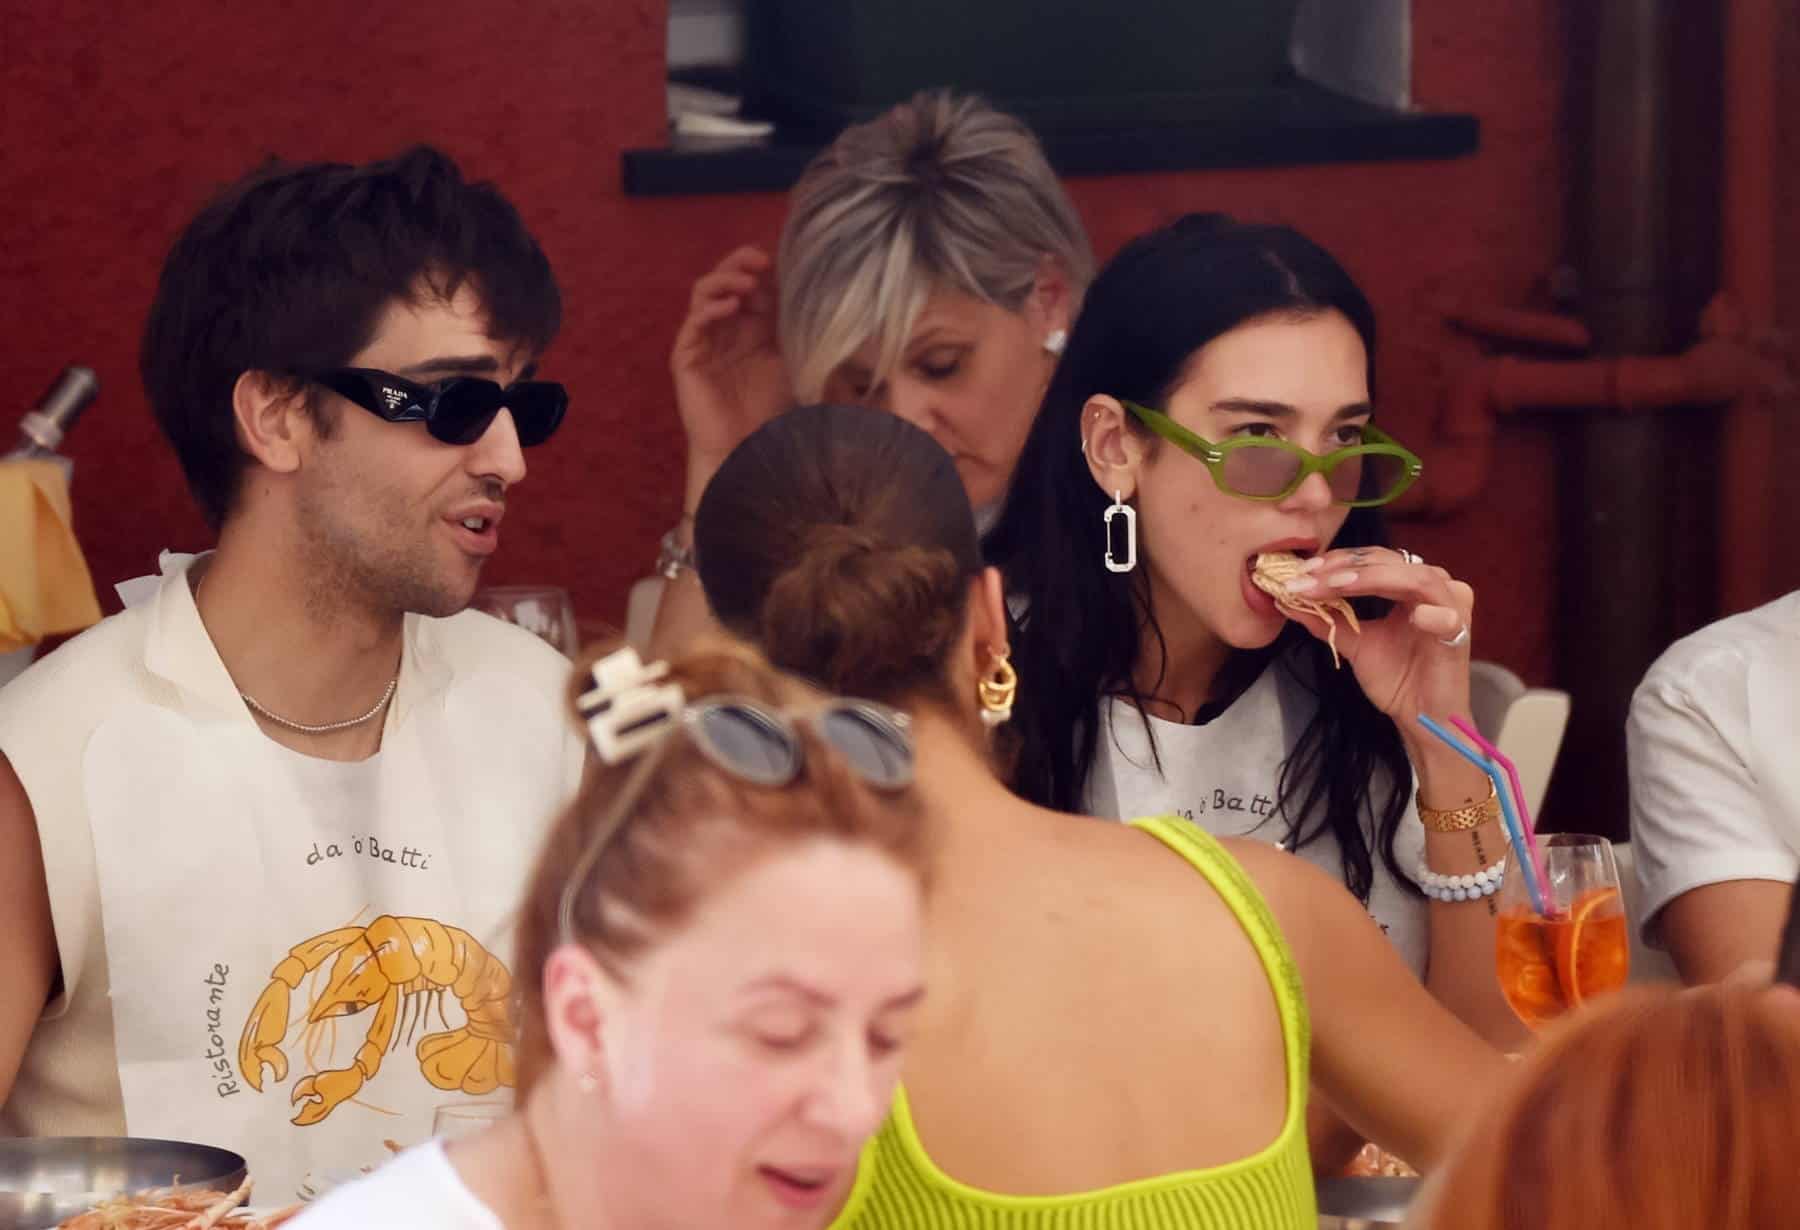 Dua Lipa Turns Up the Heat in Lacoste Short Shorts at the Lunch in Italy